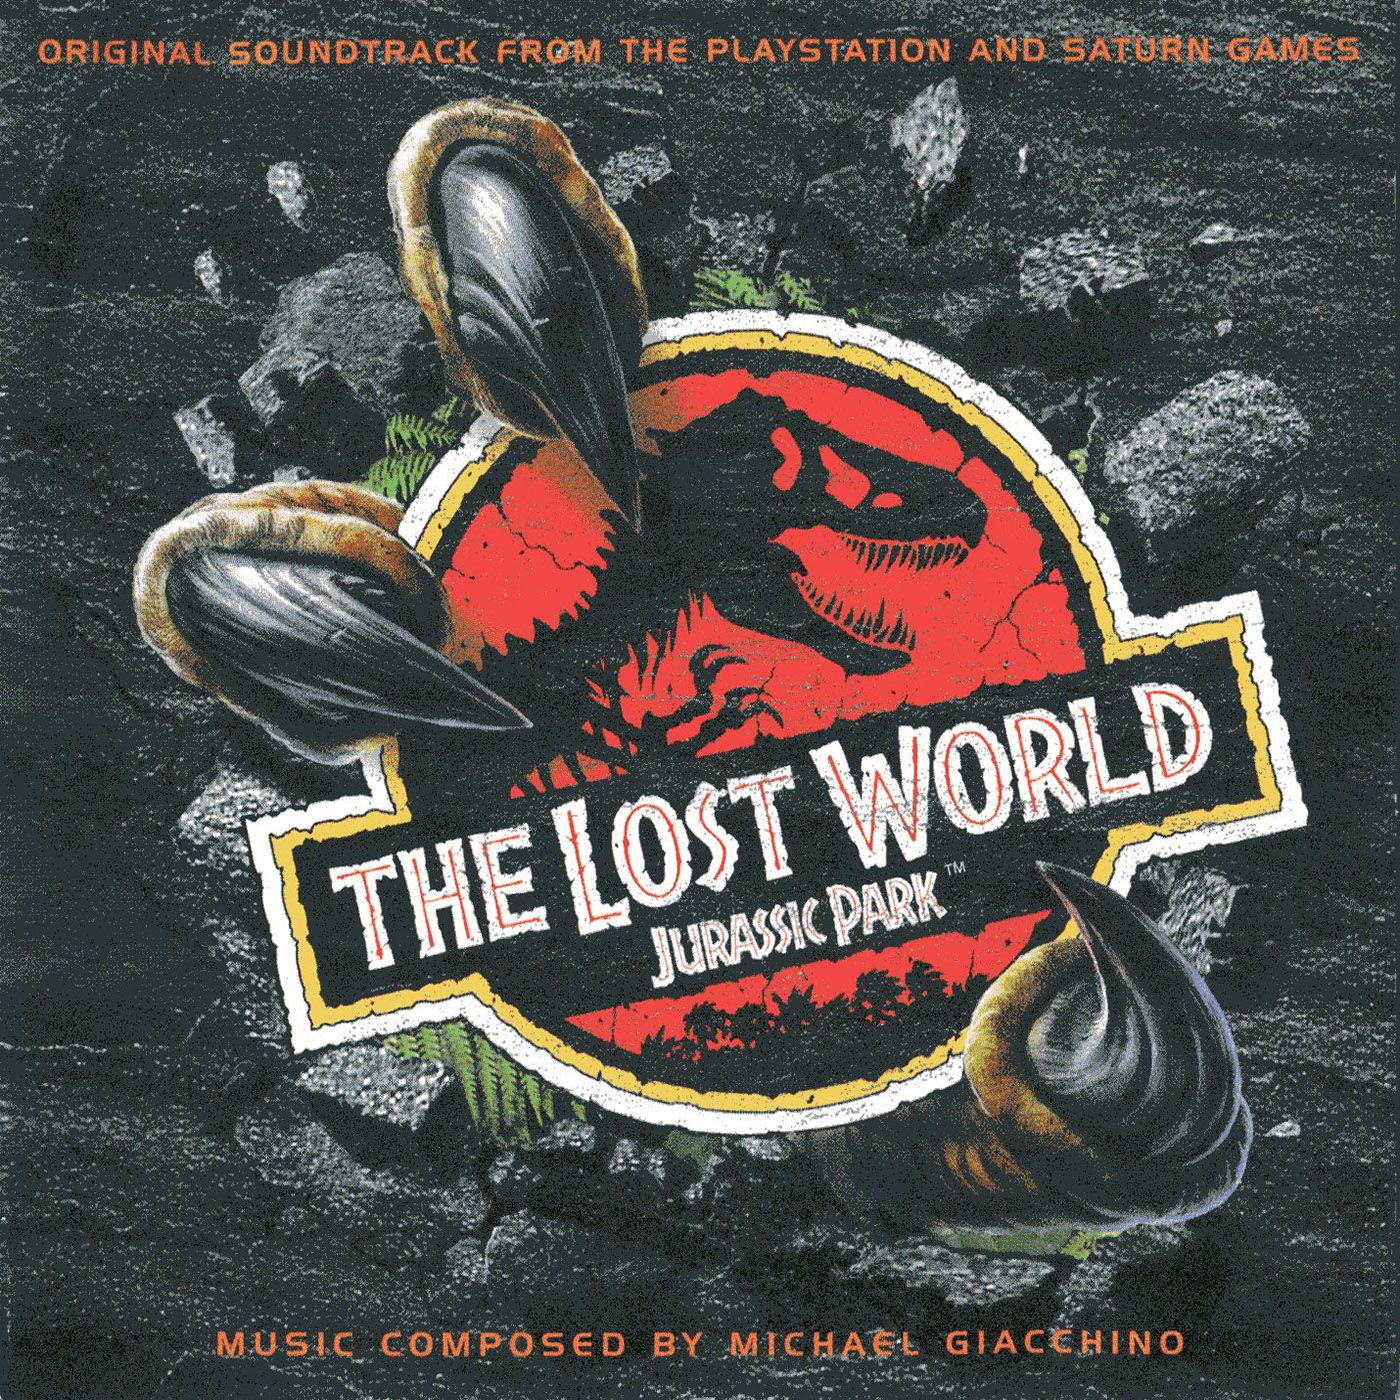 The Lost World: Jurassic Park: Original Soundtrack from the Playstation and Saturn Games album art